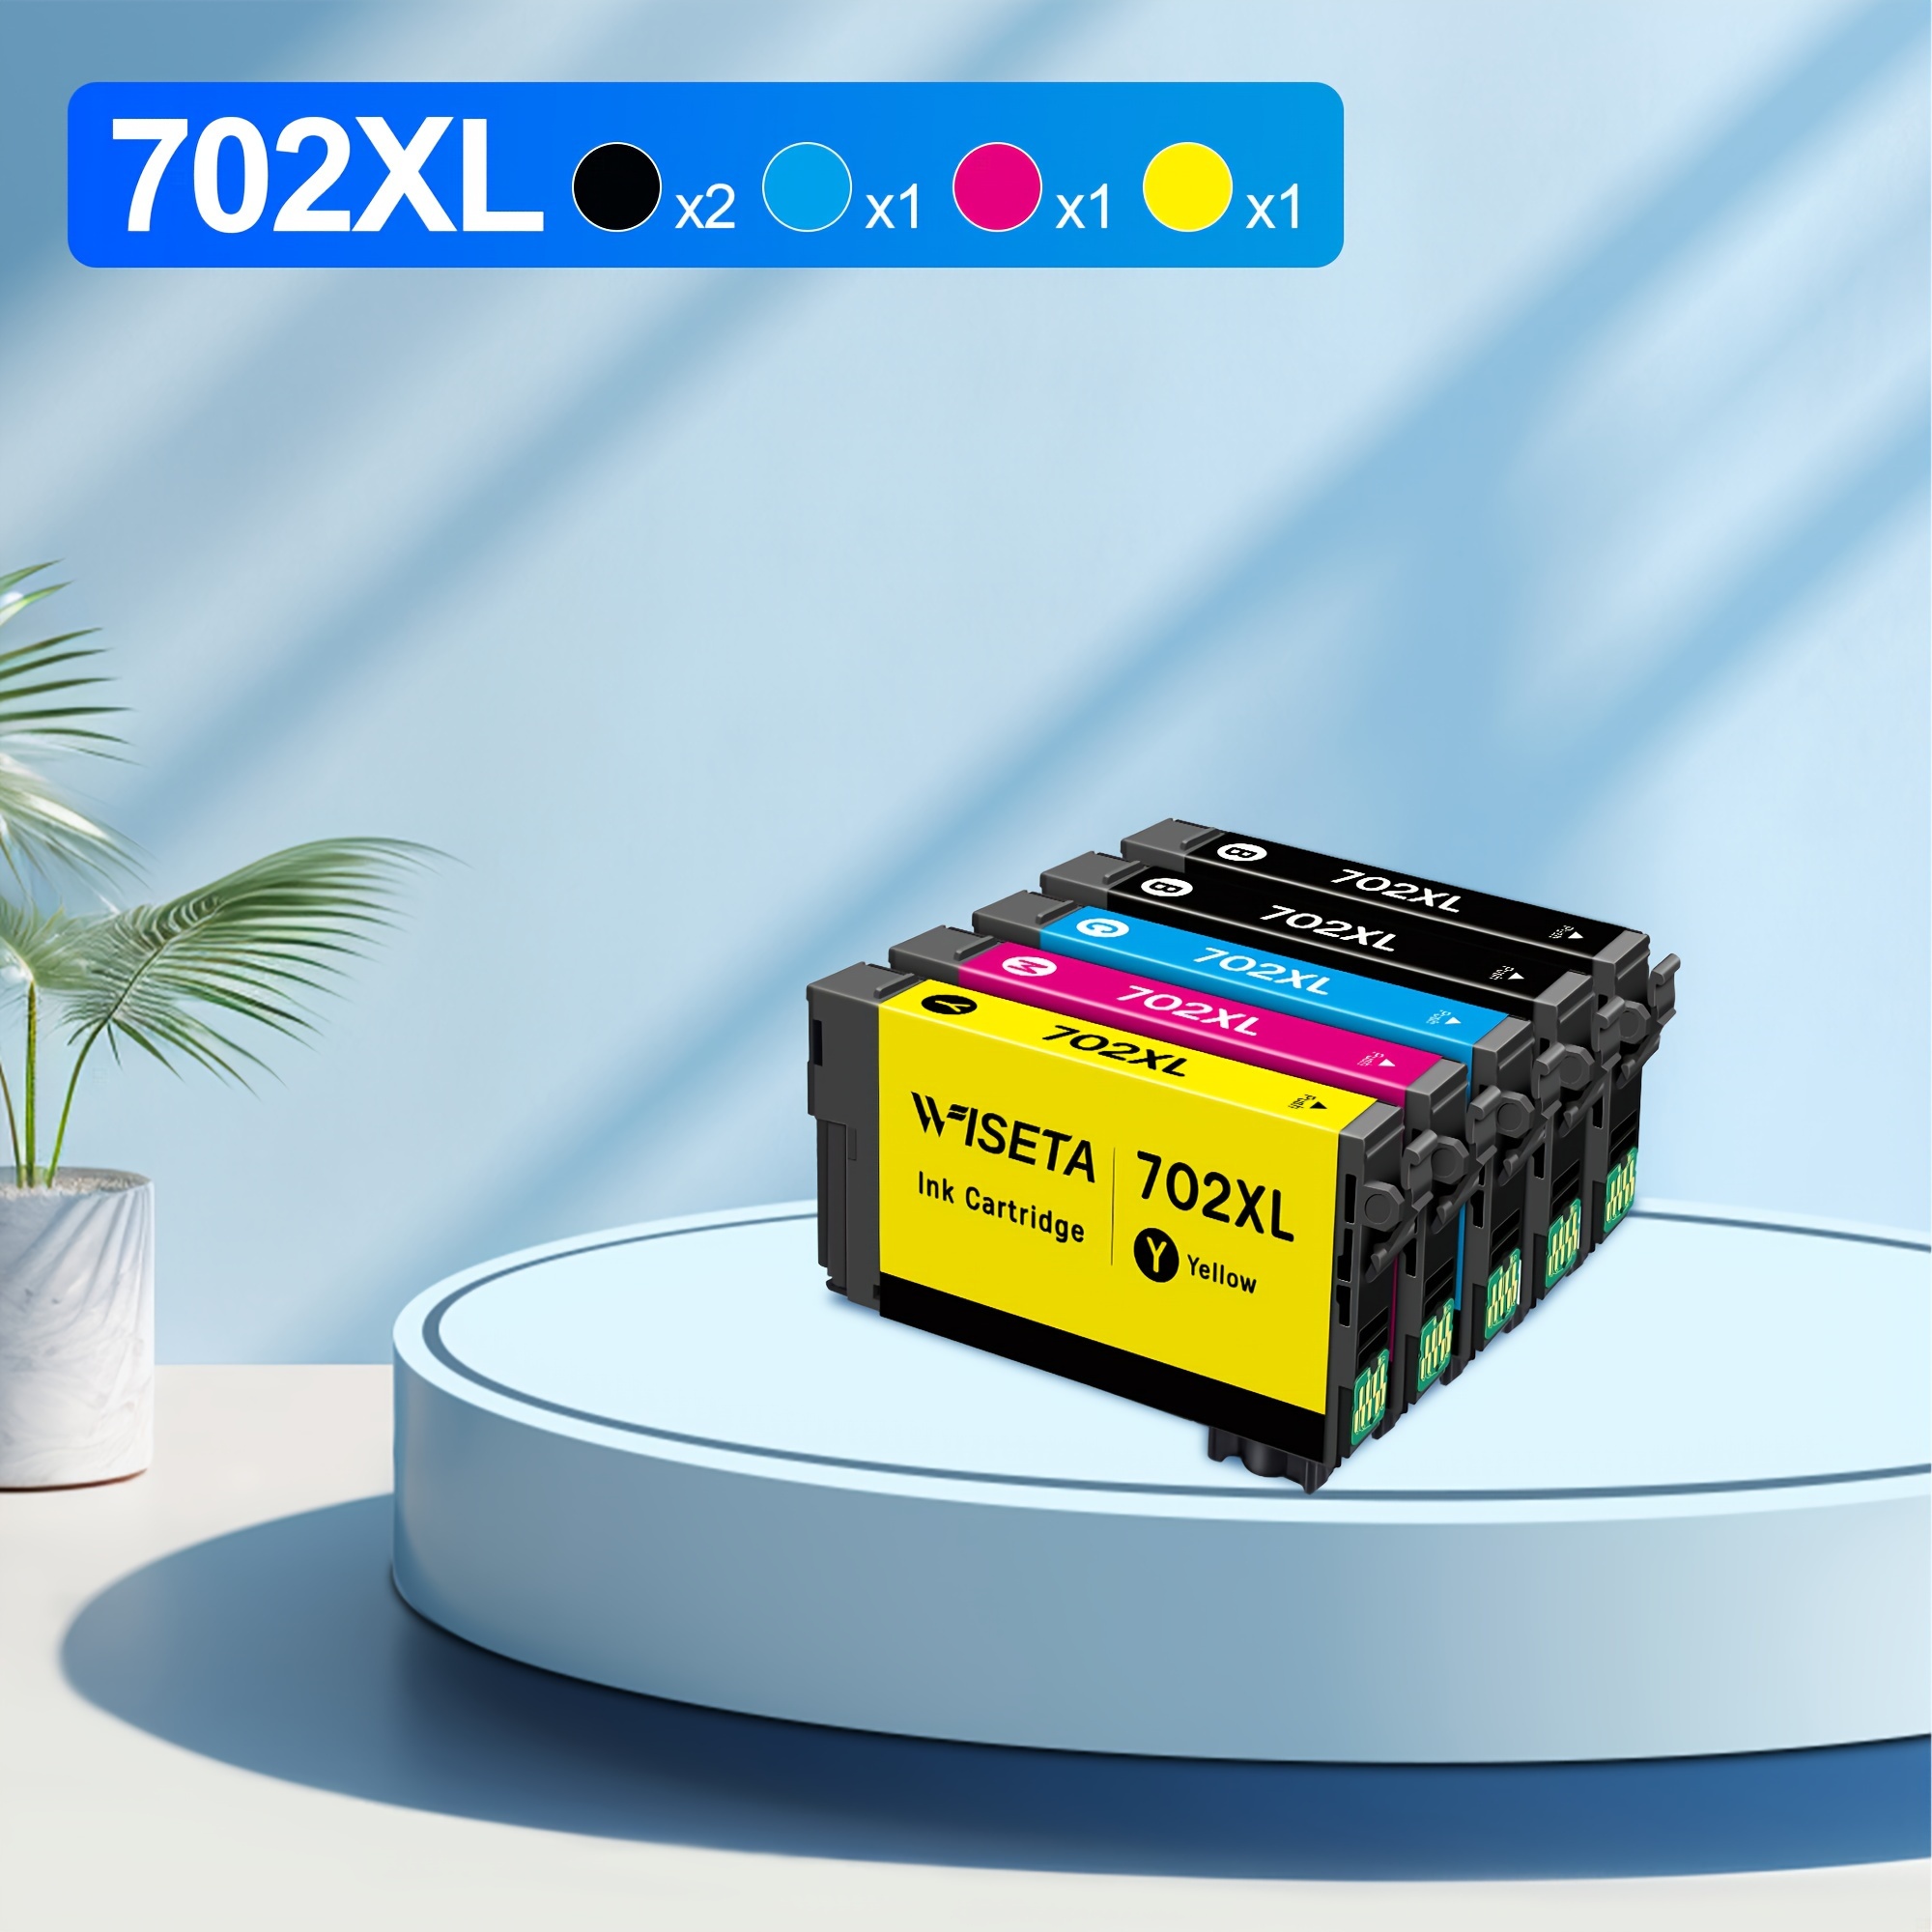 

5 Pack 702xl Ink Cartridges Remanufactured Replacement For Epson 702xl Ink Cartridges Combo Pack 702 Xl T702xl T702 To Use With Workforce Pro Wf-3720 Wf-3730 Wf-3733 Printer